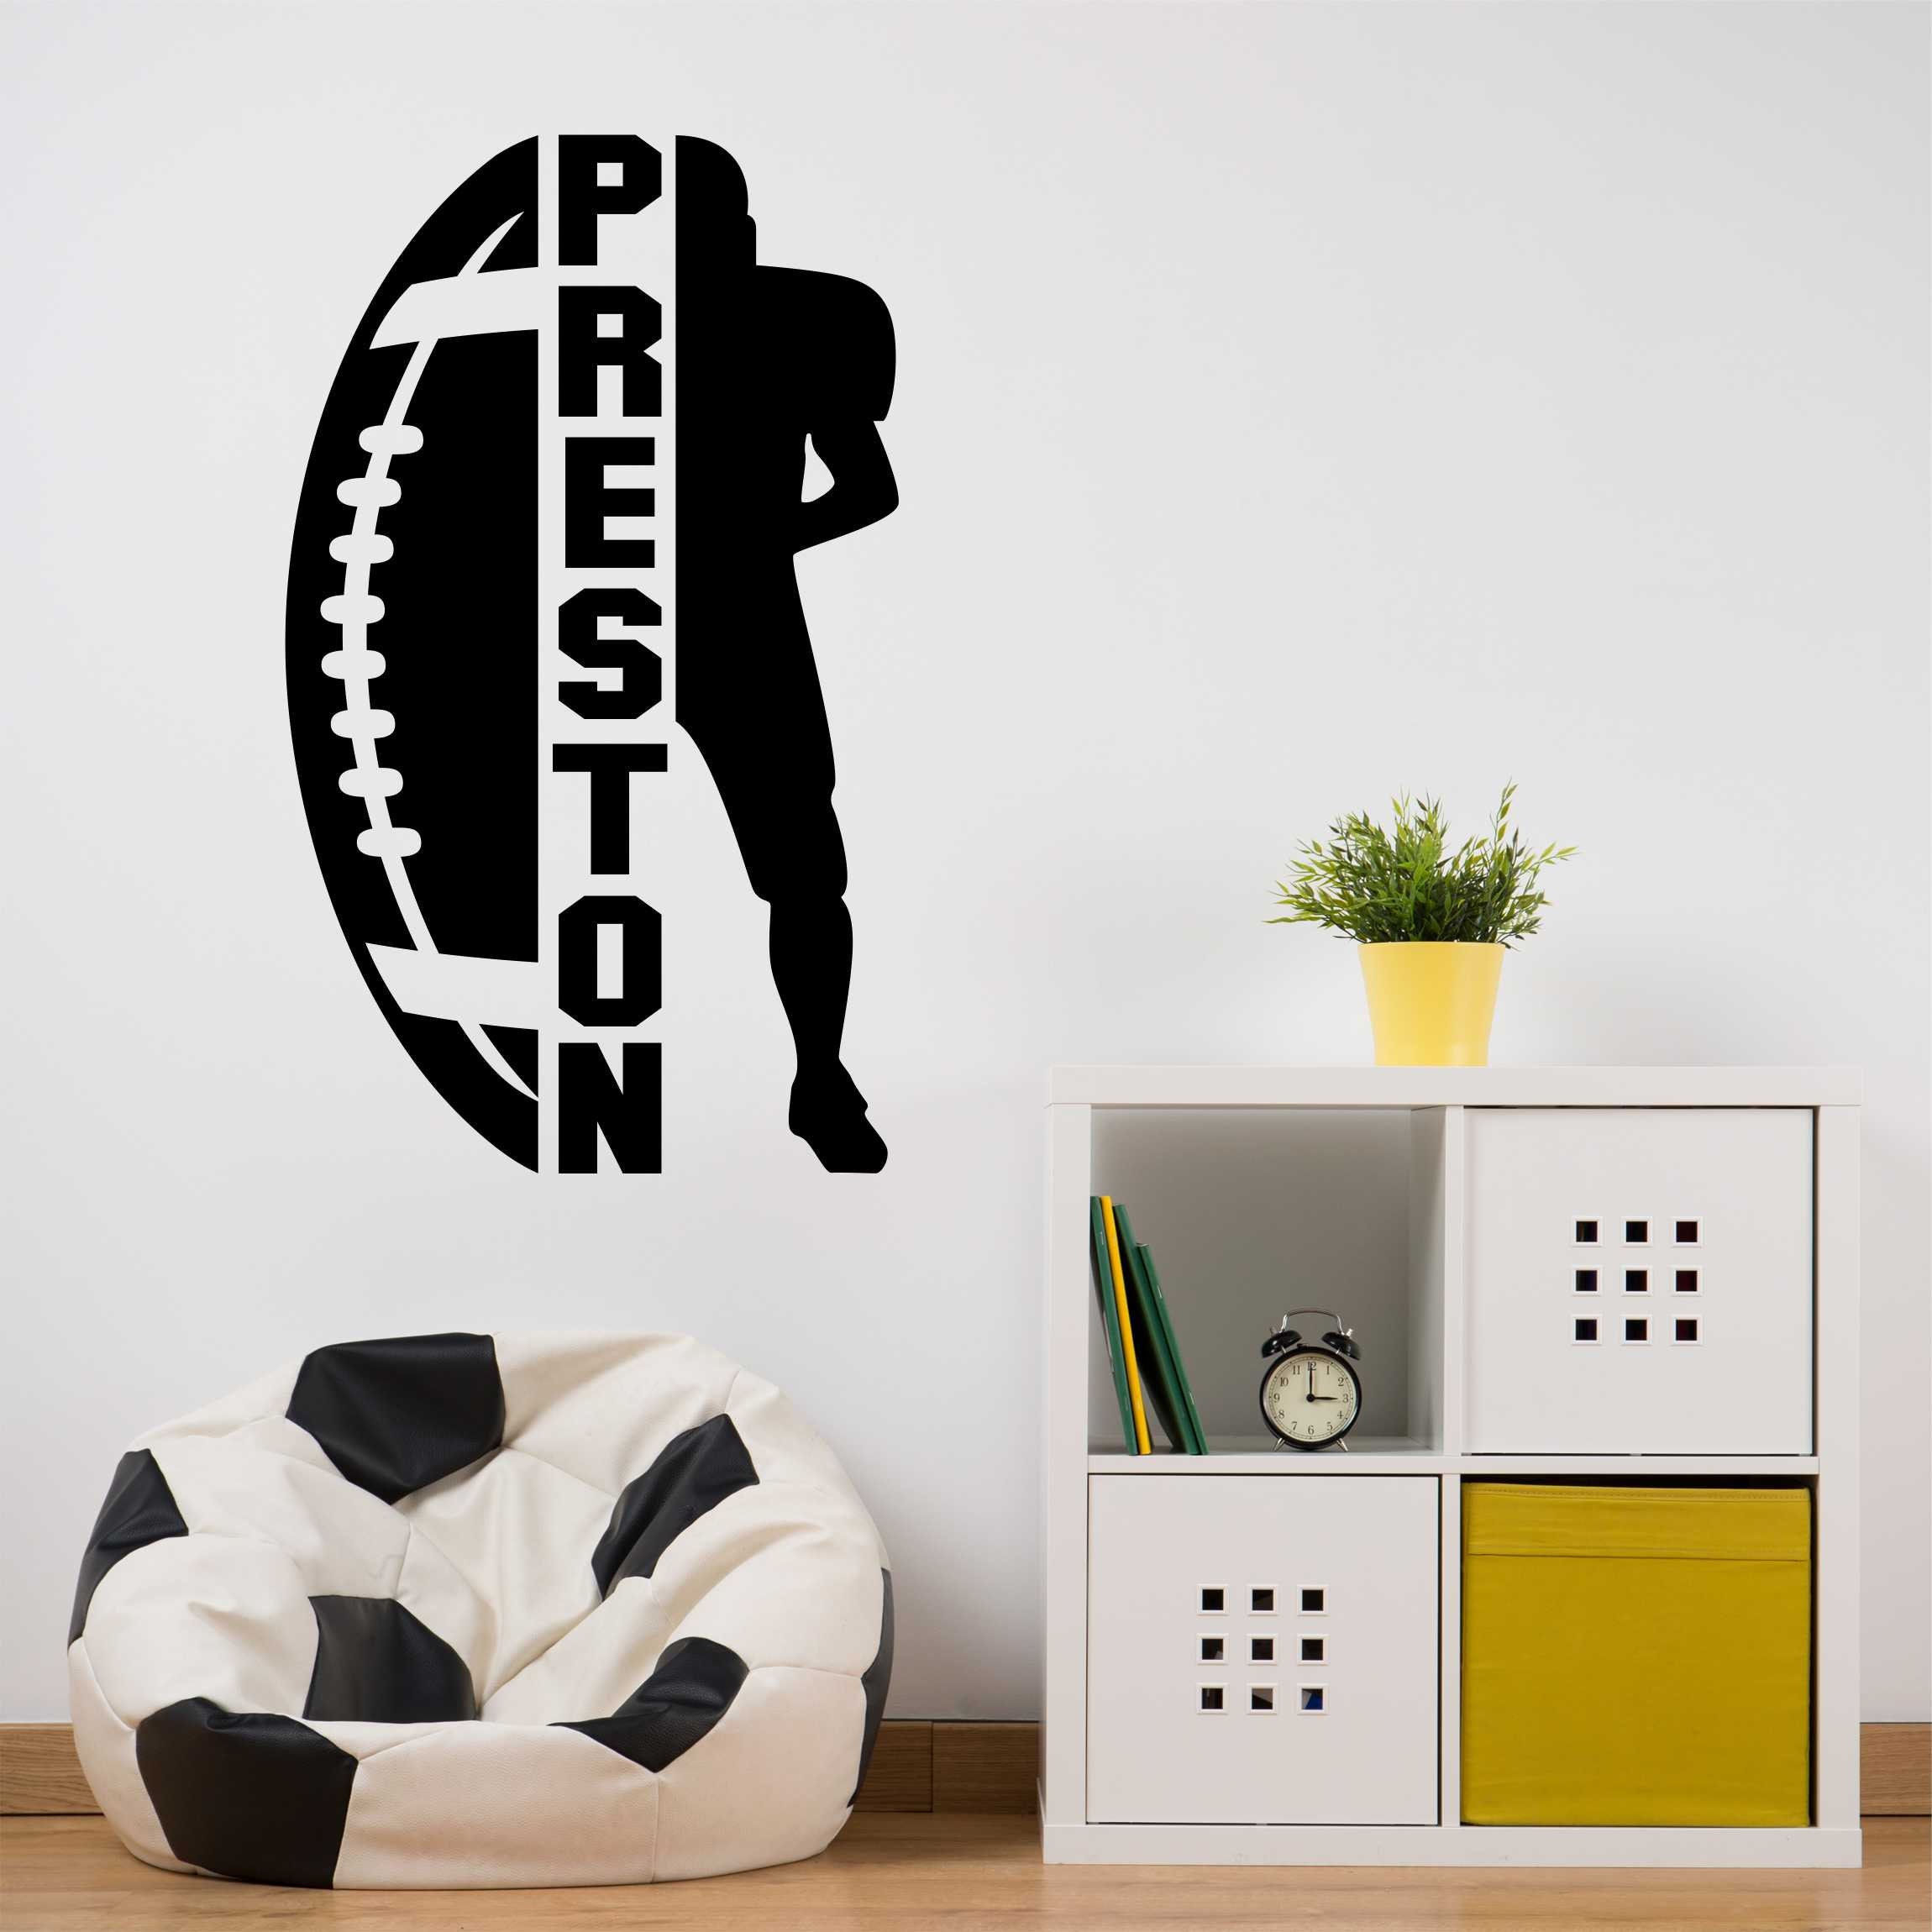 Pack of 3 Sports Stickers Football Wall Stickers for Boys Bedroom or Playroom 